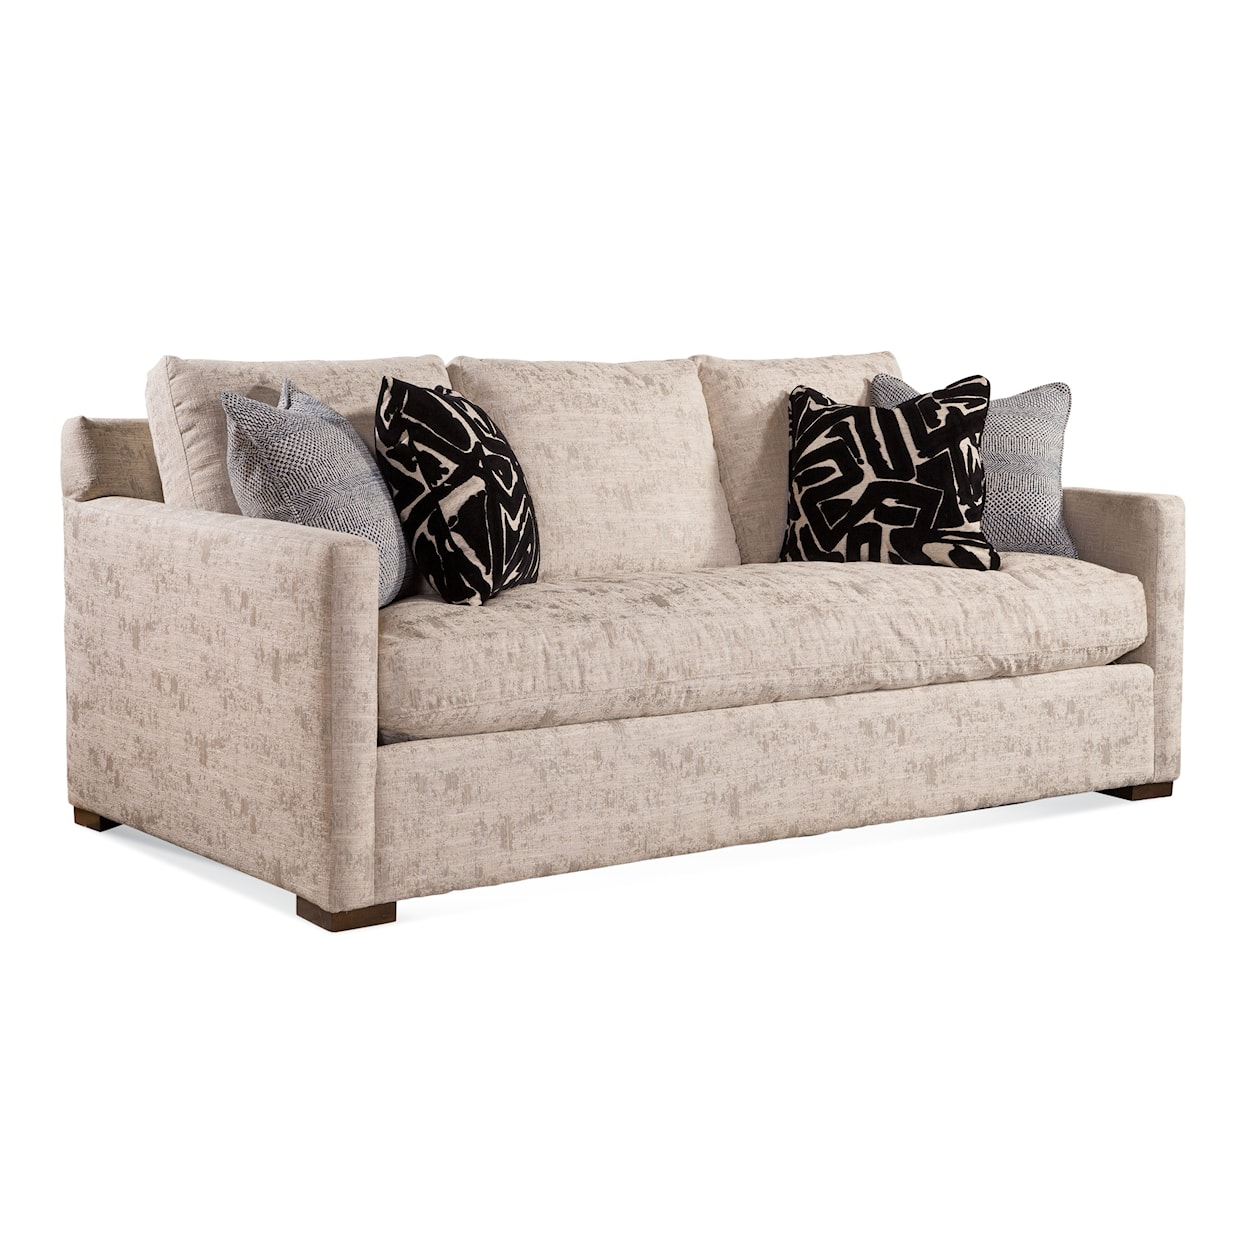 Braxton Culler Bel-Air Sofa with Bench Seat